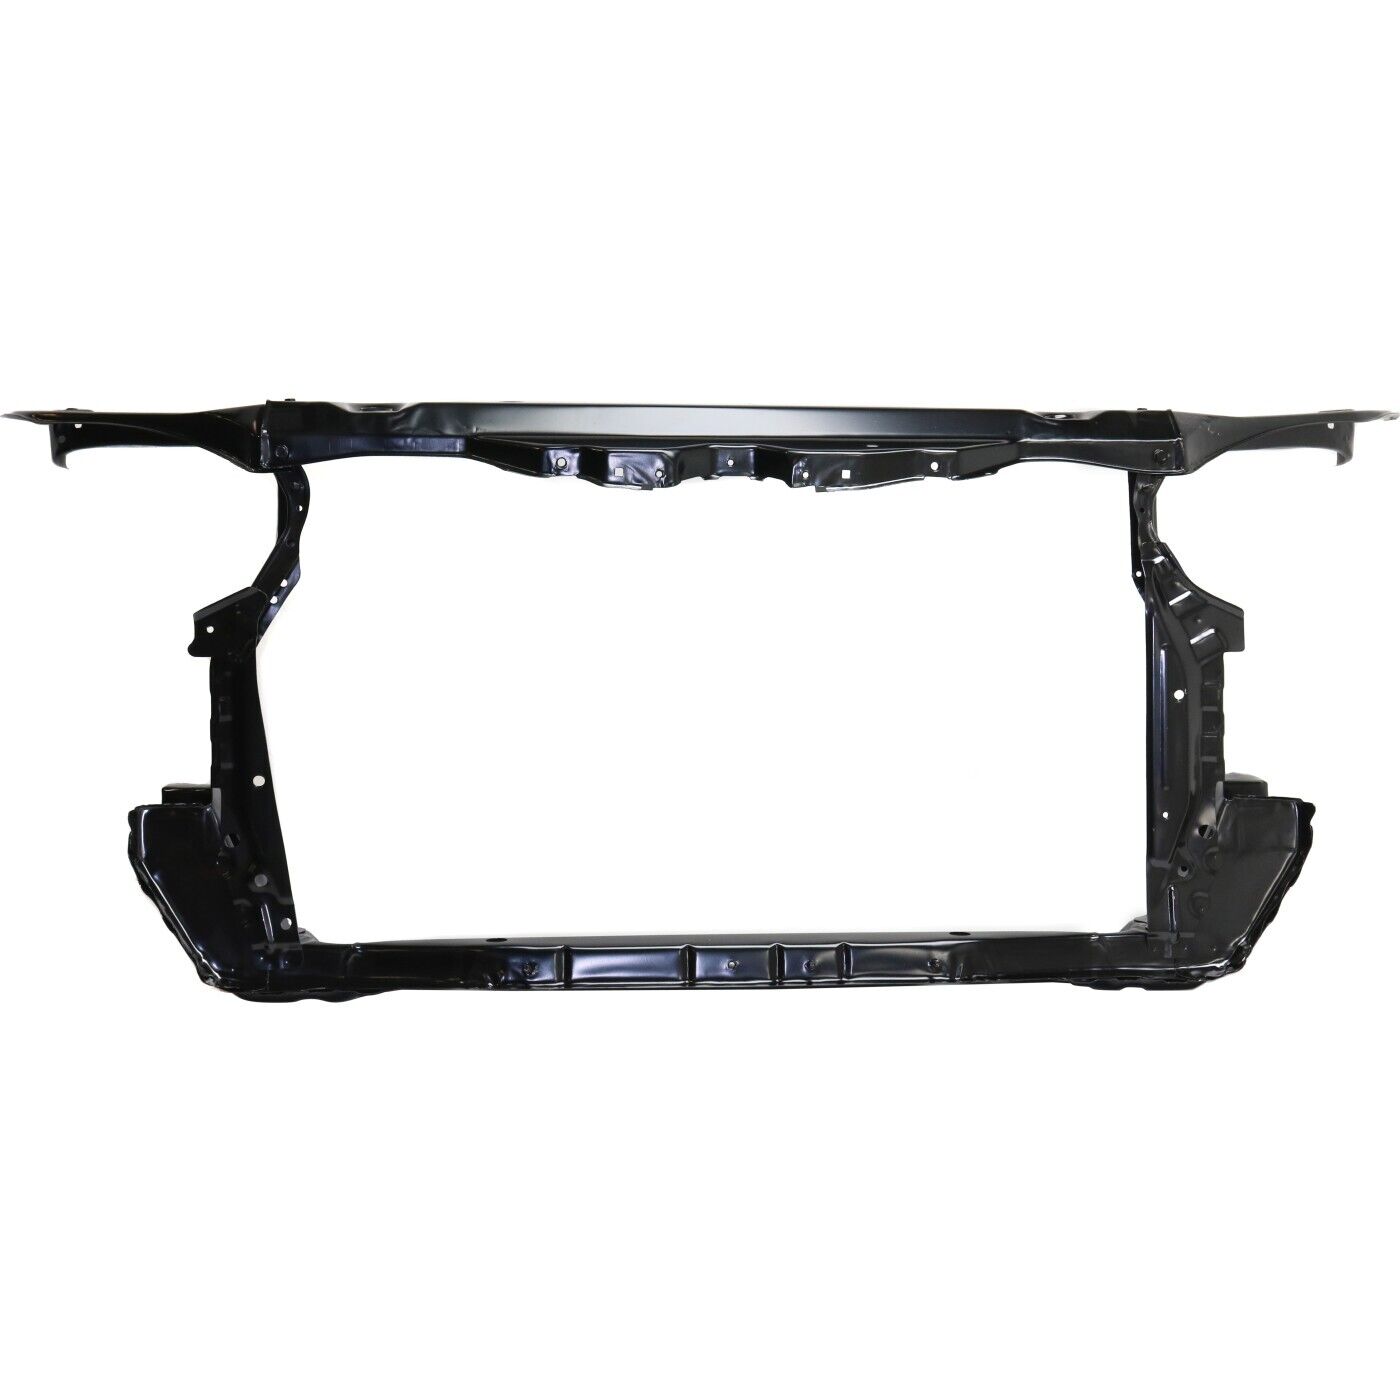 Radiator Support For 2002-2006 Toyota Camry Assembly